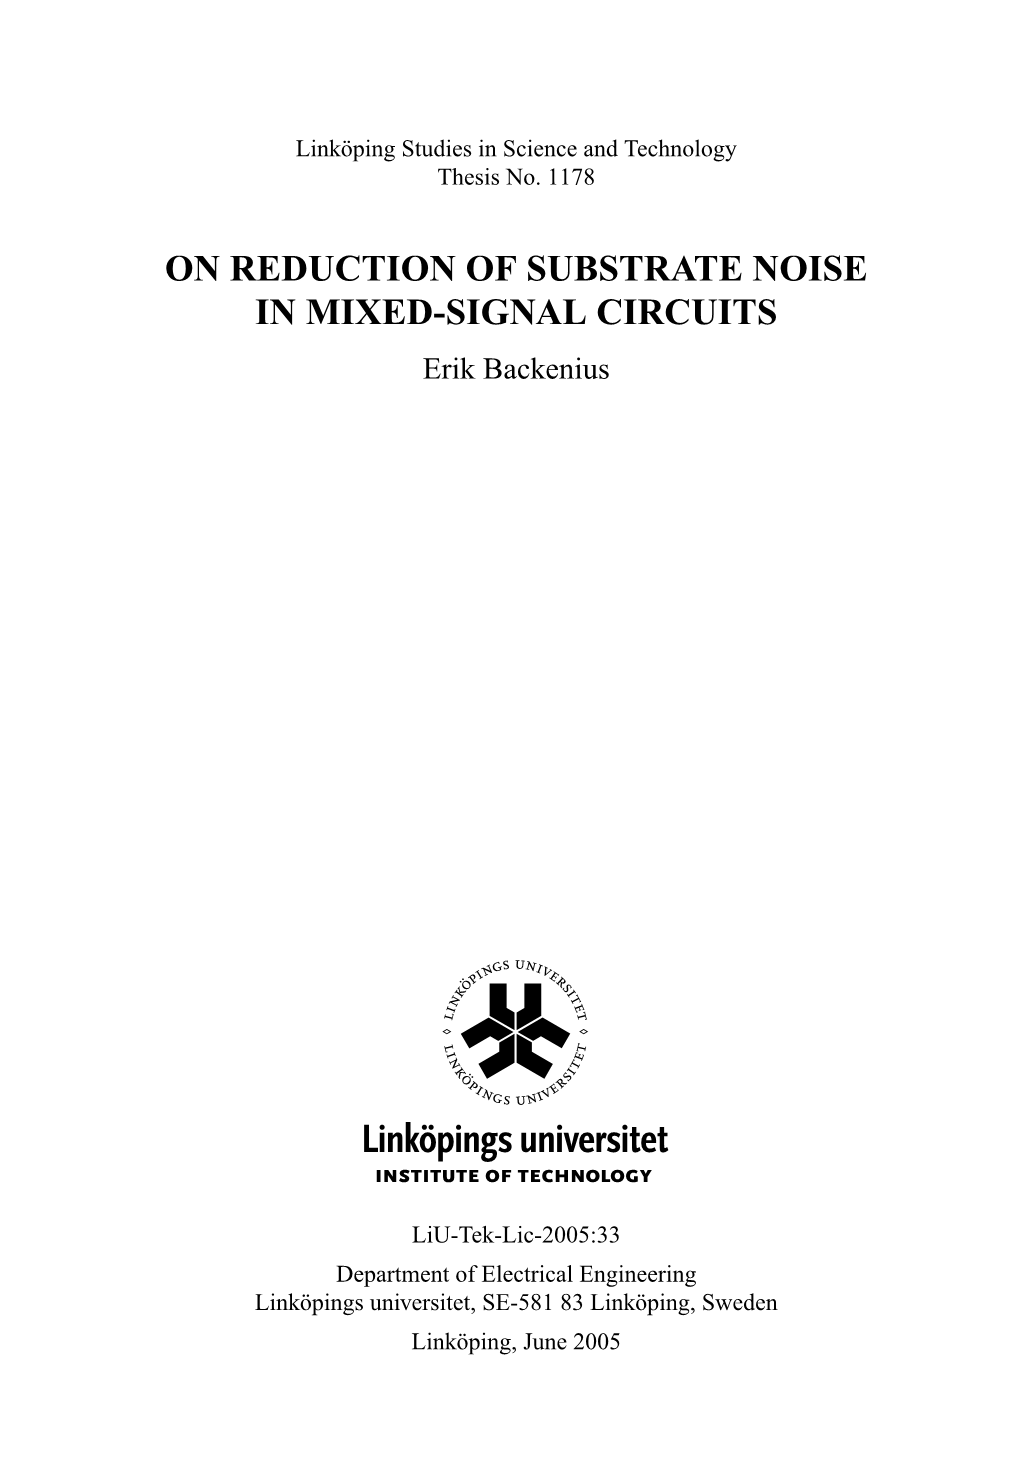 On Reduction of Substrate Noise in Mixed-Signal Circuits